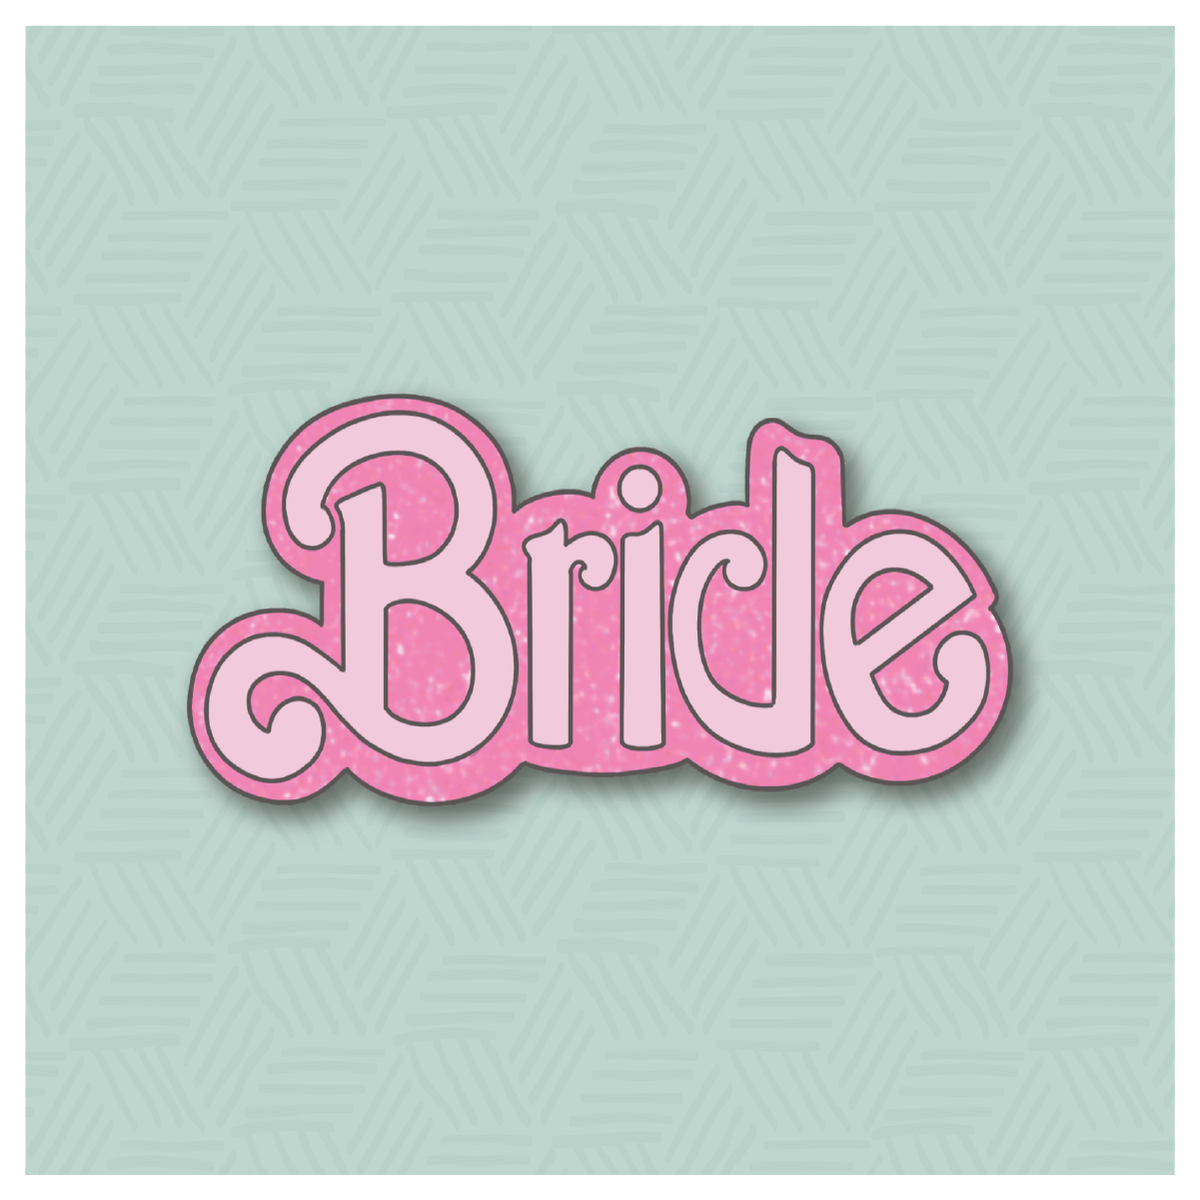 Barbie Bride Hand Lettered Cookie Cutter